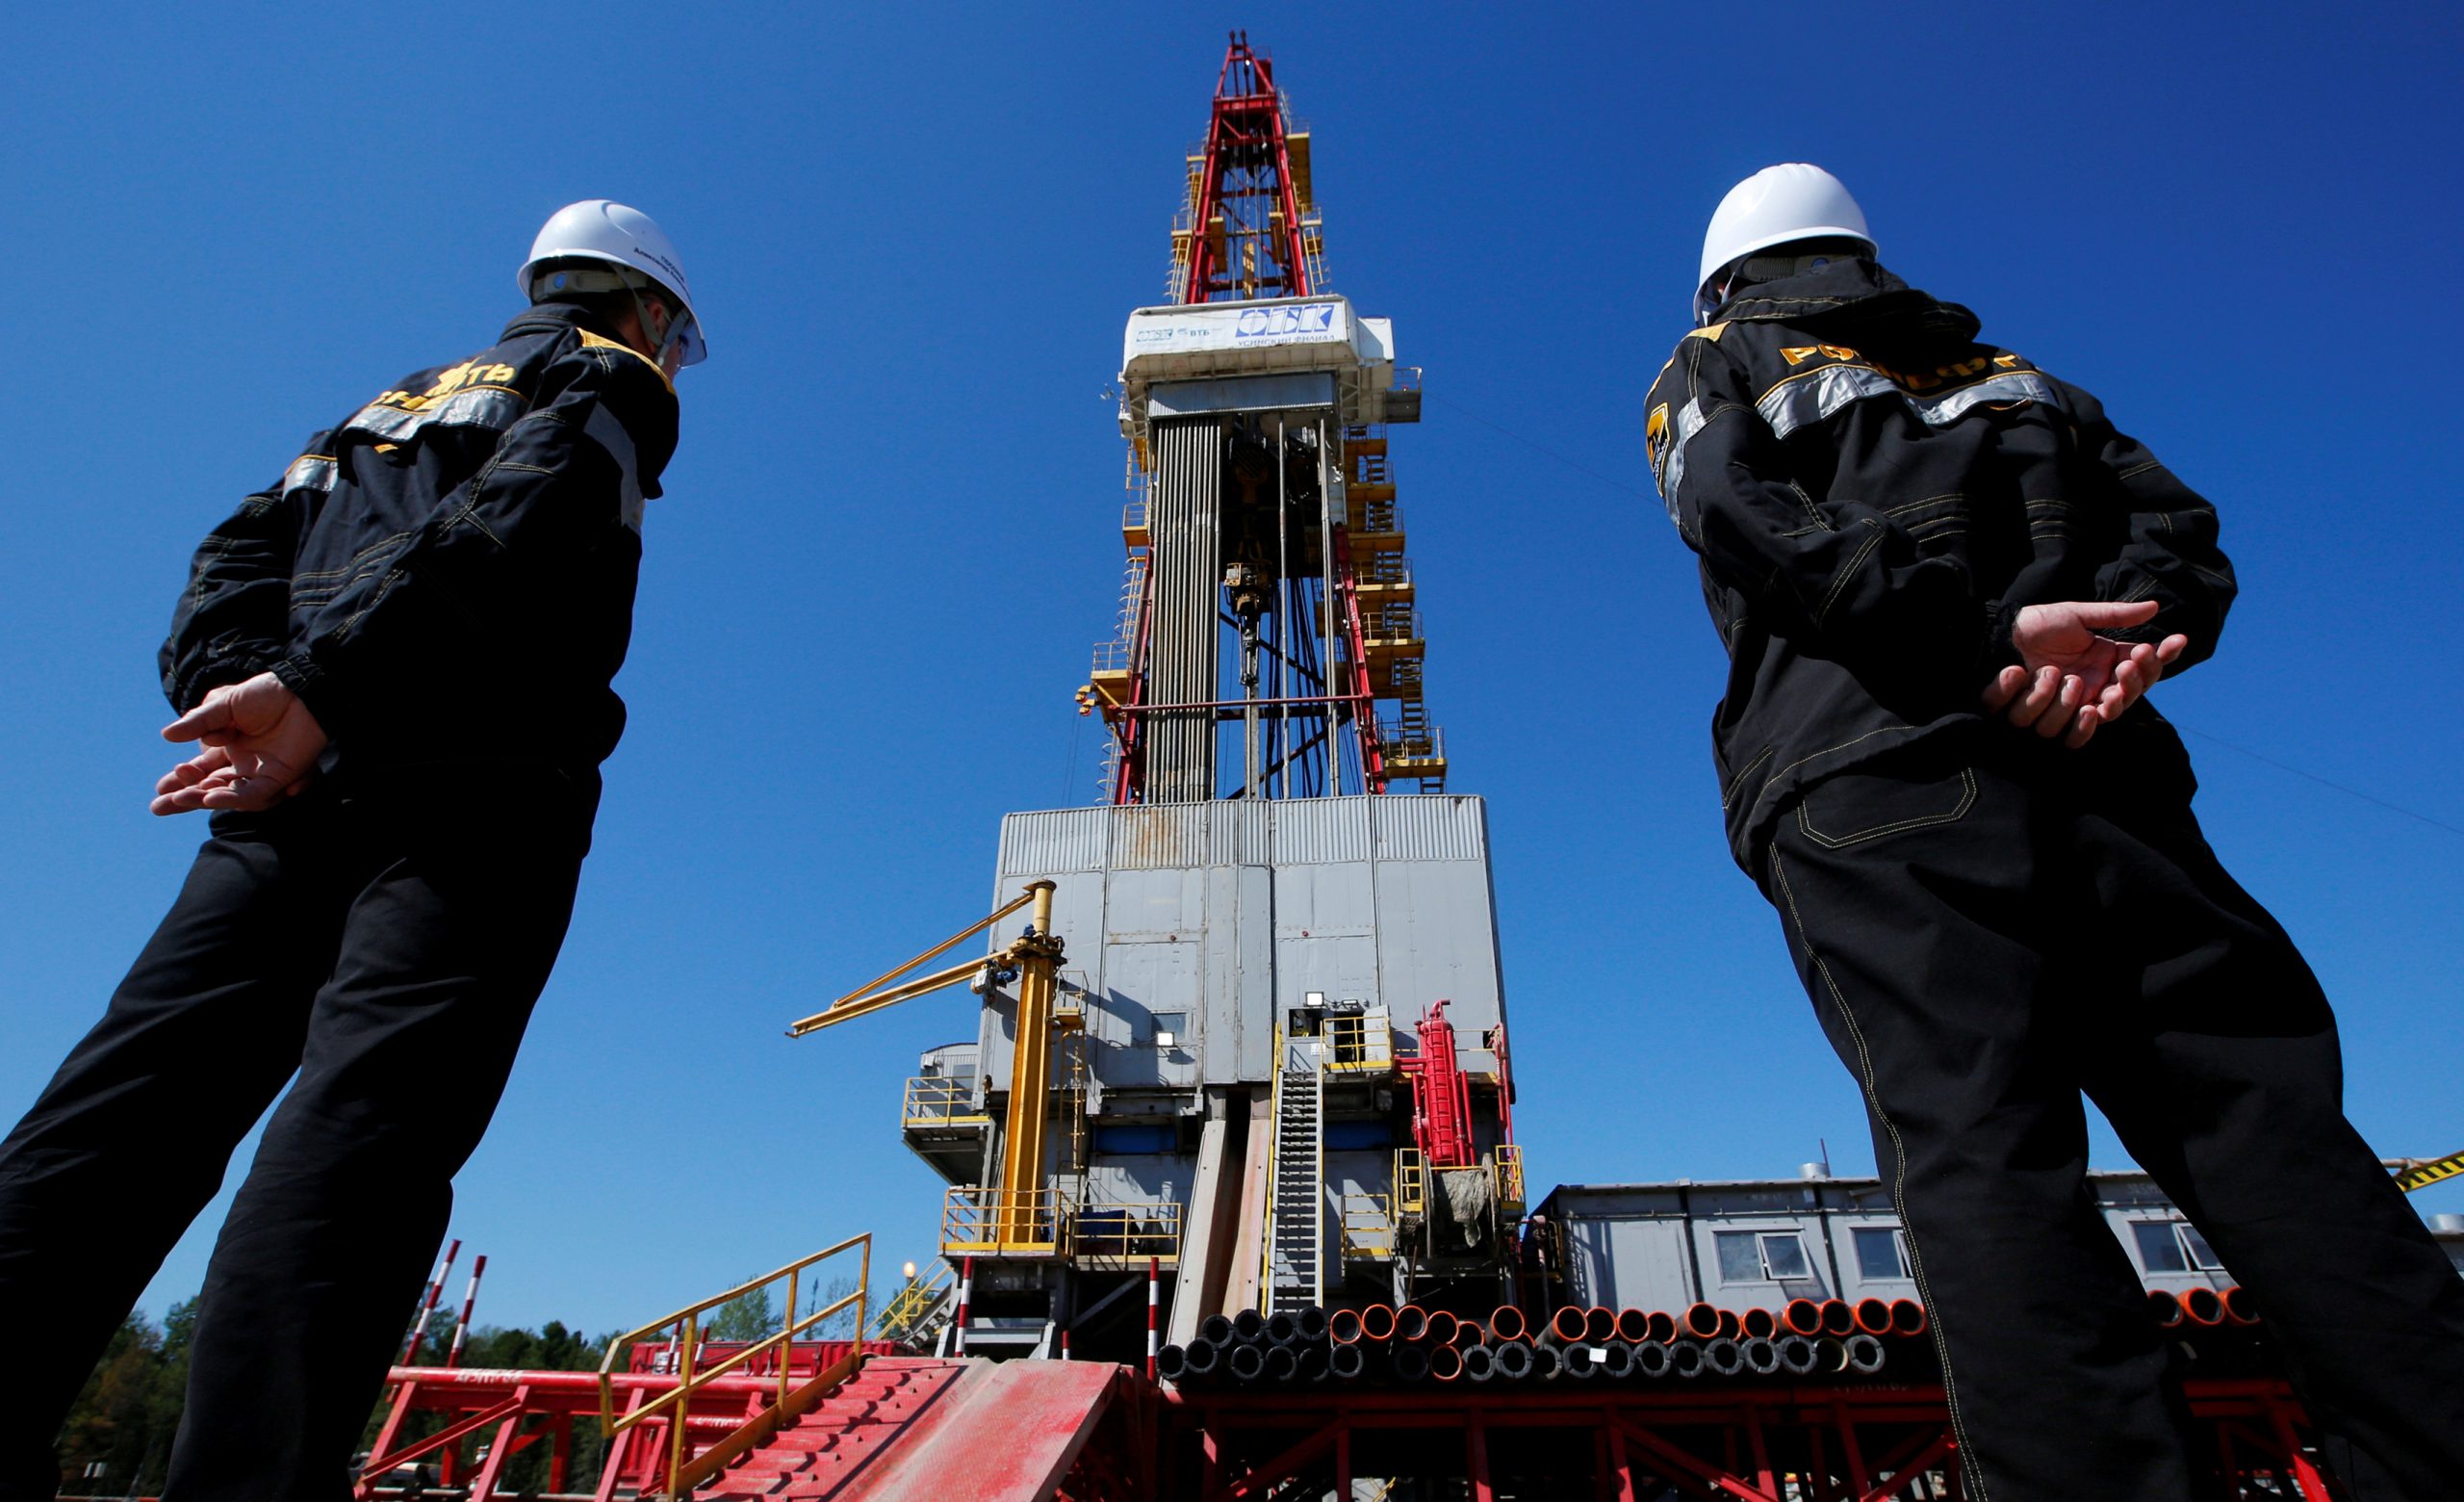 Credit: Workers look at a drilling rig at a well pad of the Rosneft-owned Prirazlomnoye oil field outside the West Siberian city of Nefteyugansk, Russia, August 4, 2016. Credit: REUTERS/Sergei Karpukhin/File Photo